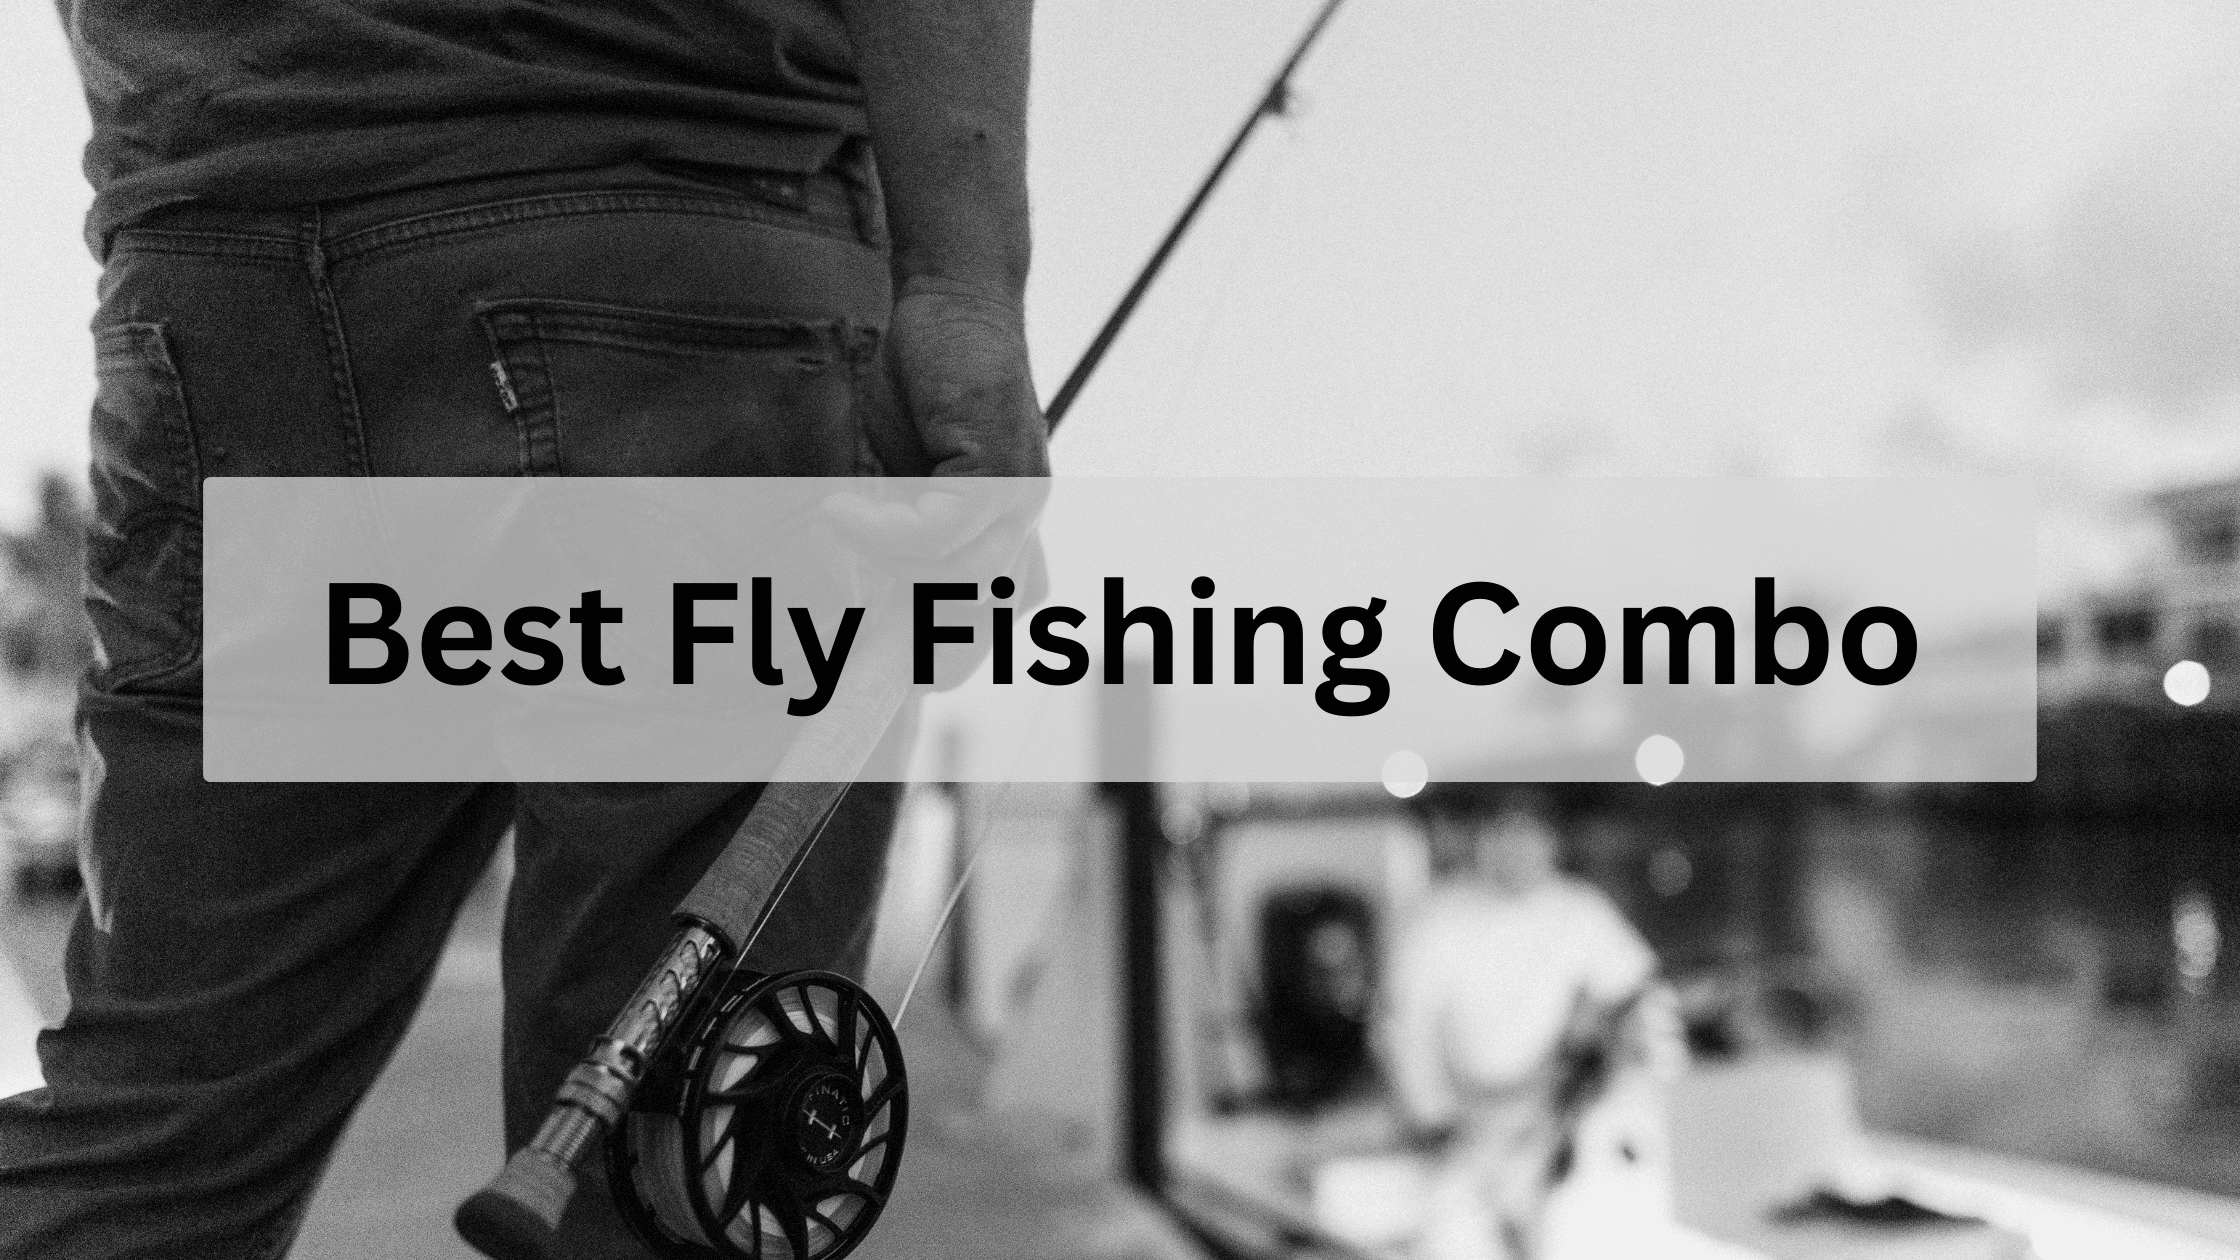 Best Fly Fishing Combo